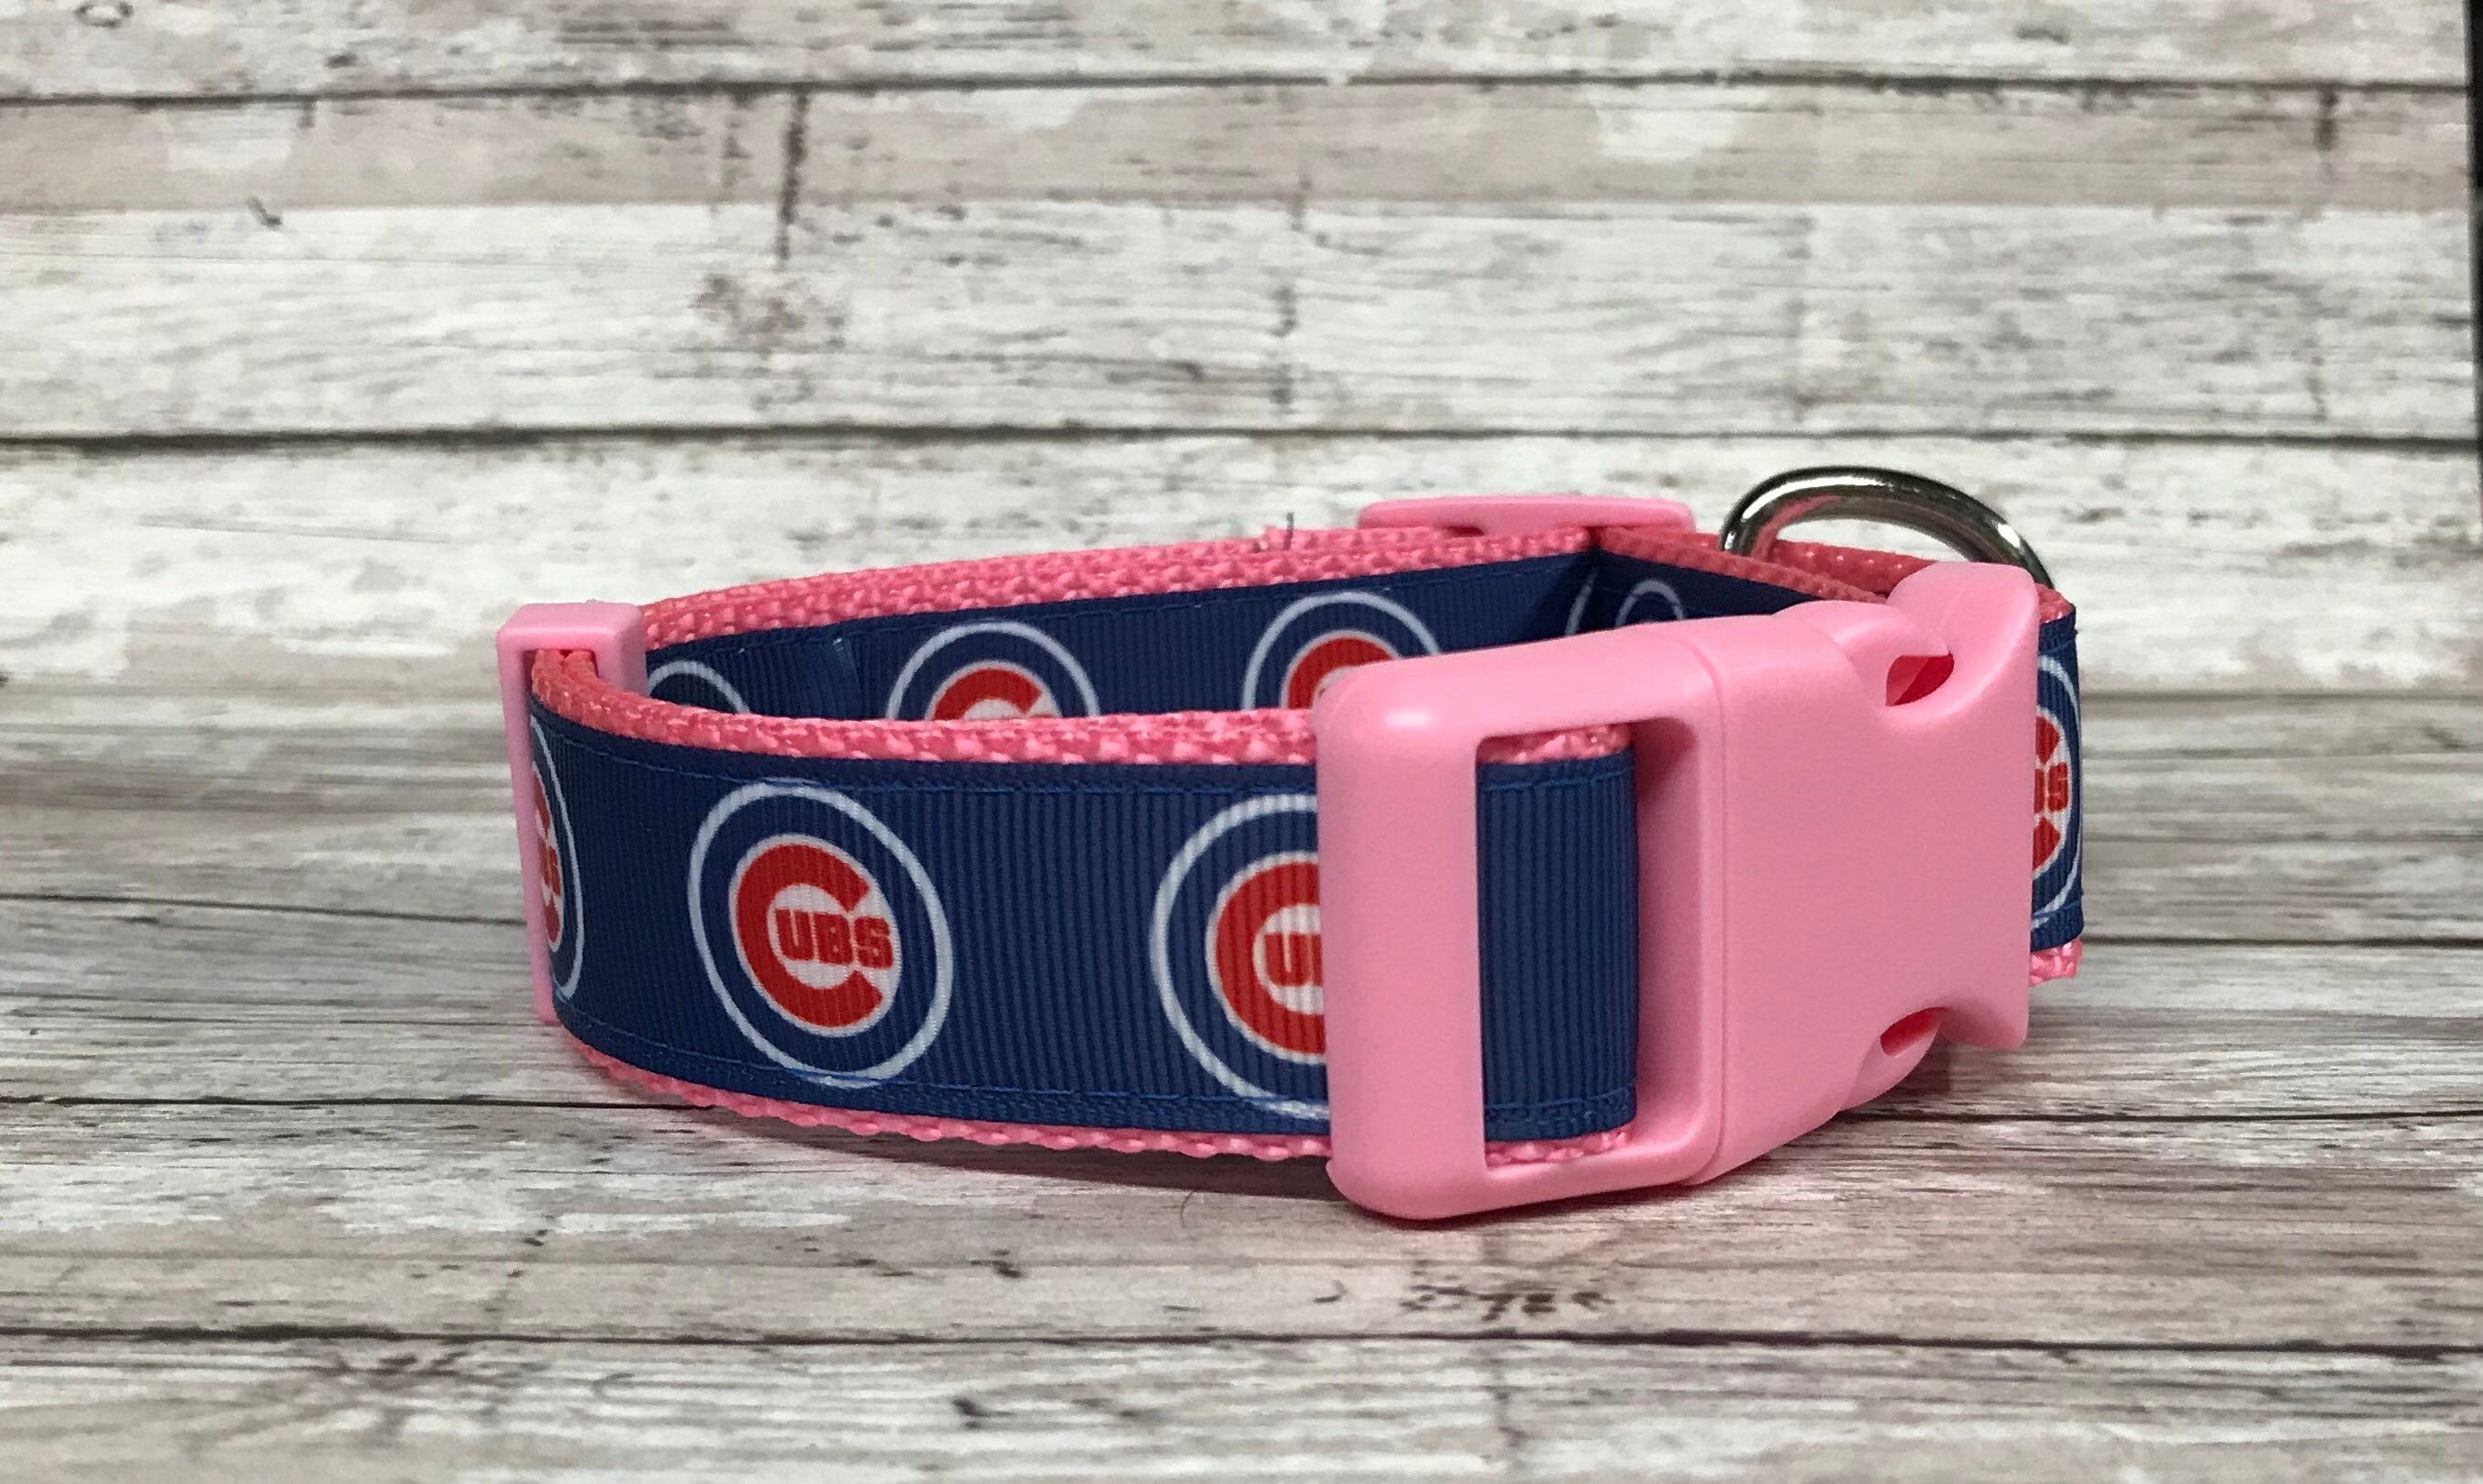 MLB Chicago Cubs Dog Leash, Small